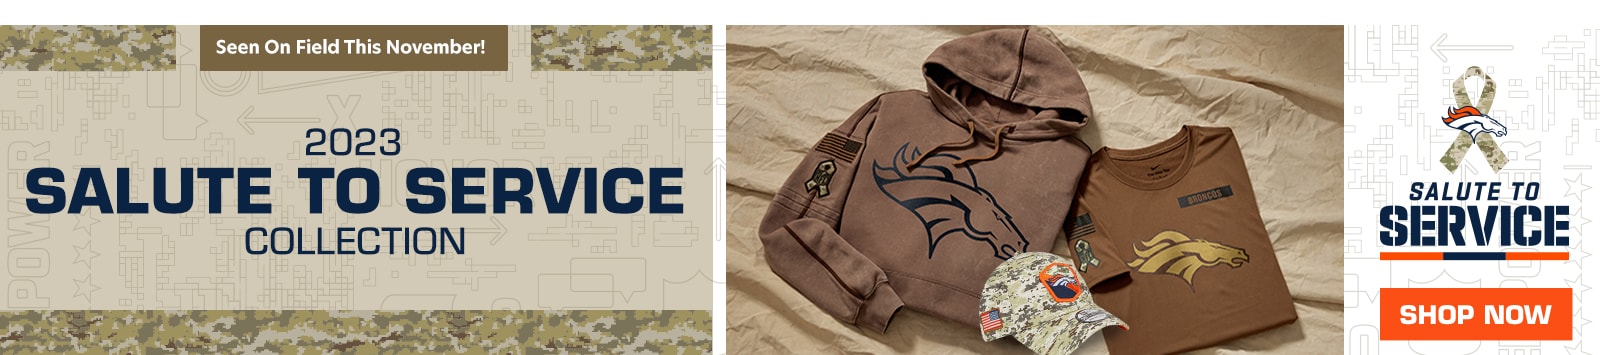 2023 Salute To Service Collection. As Seen On-Field This November! Shop Now.